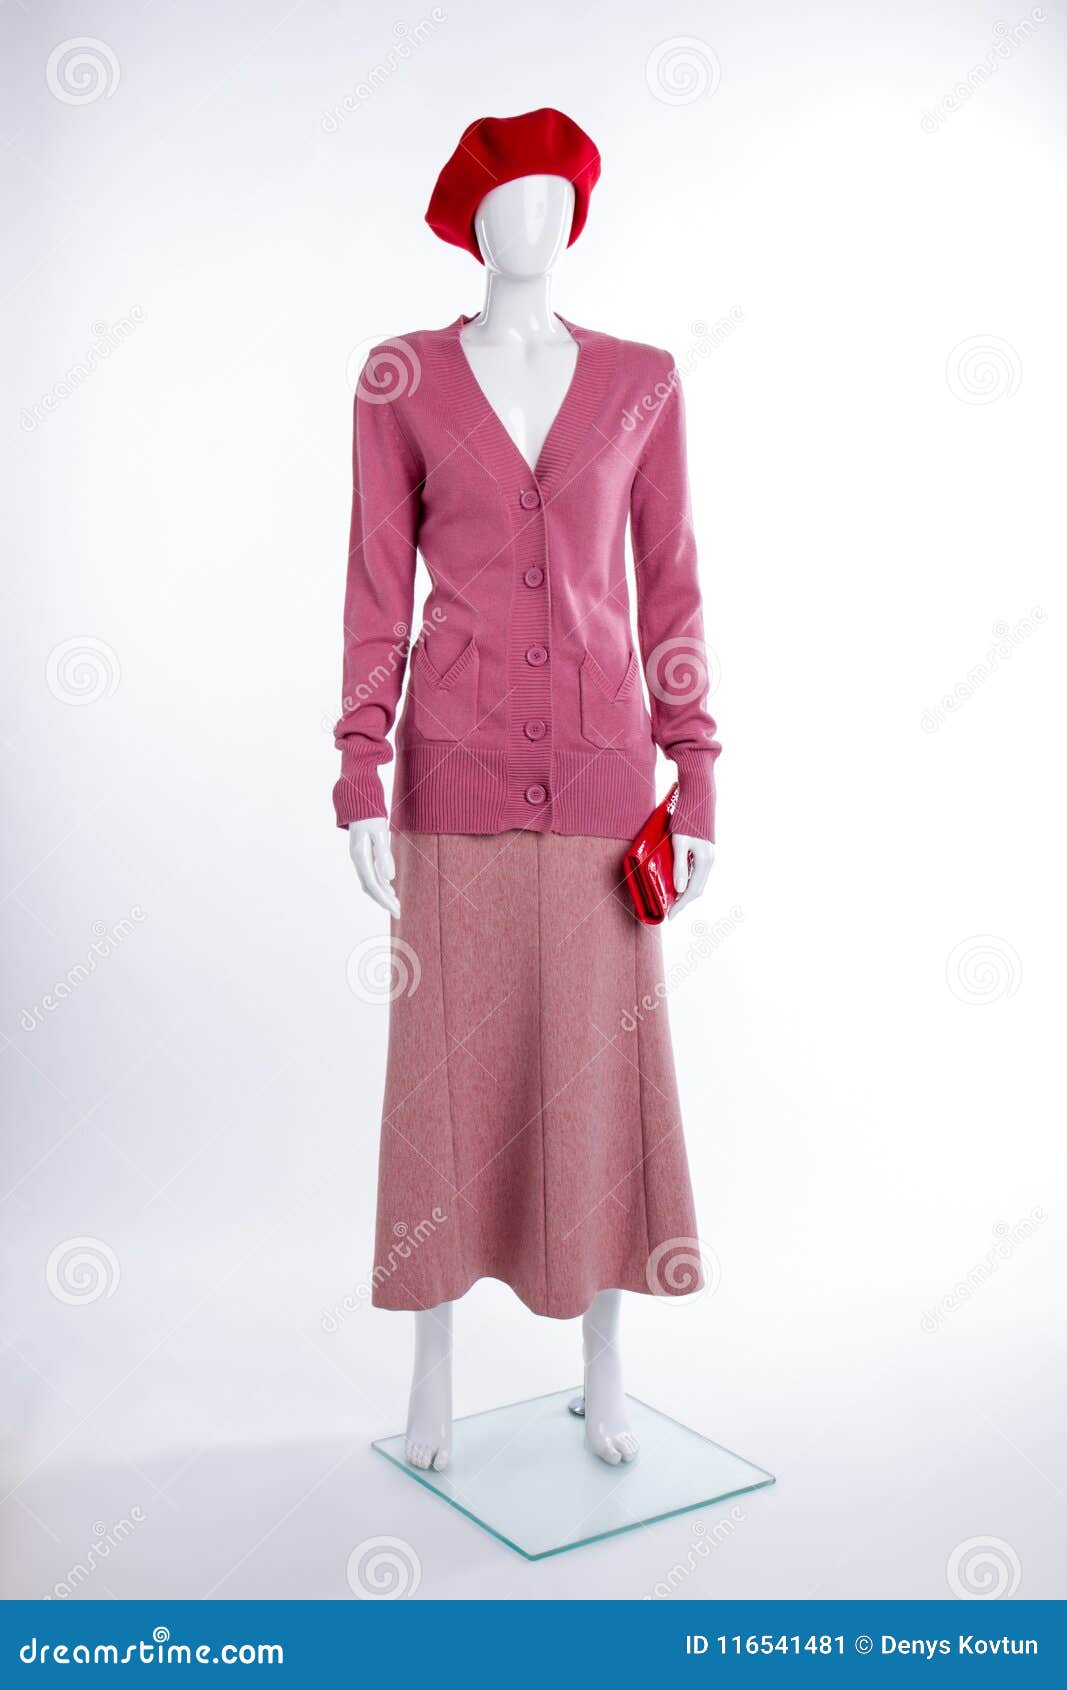 Full Length Mannequin in Sweater and Skirt. Stock Image - Image of ...